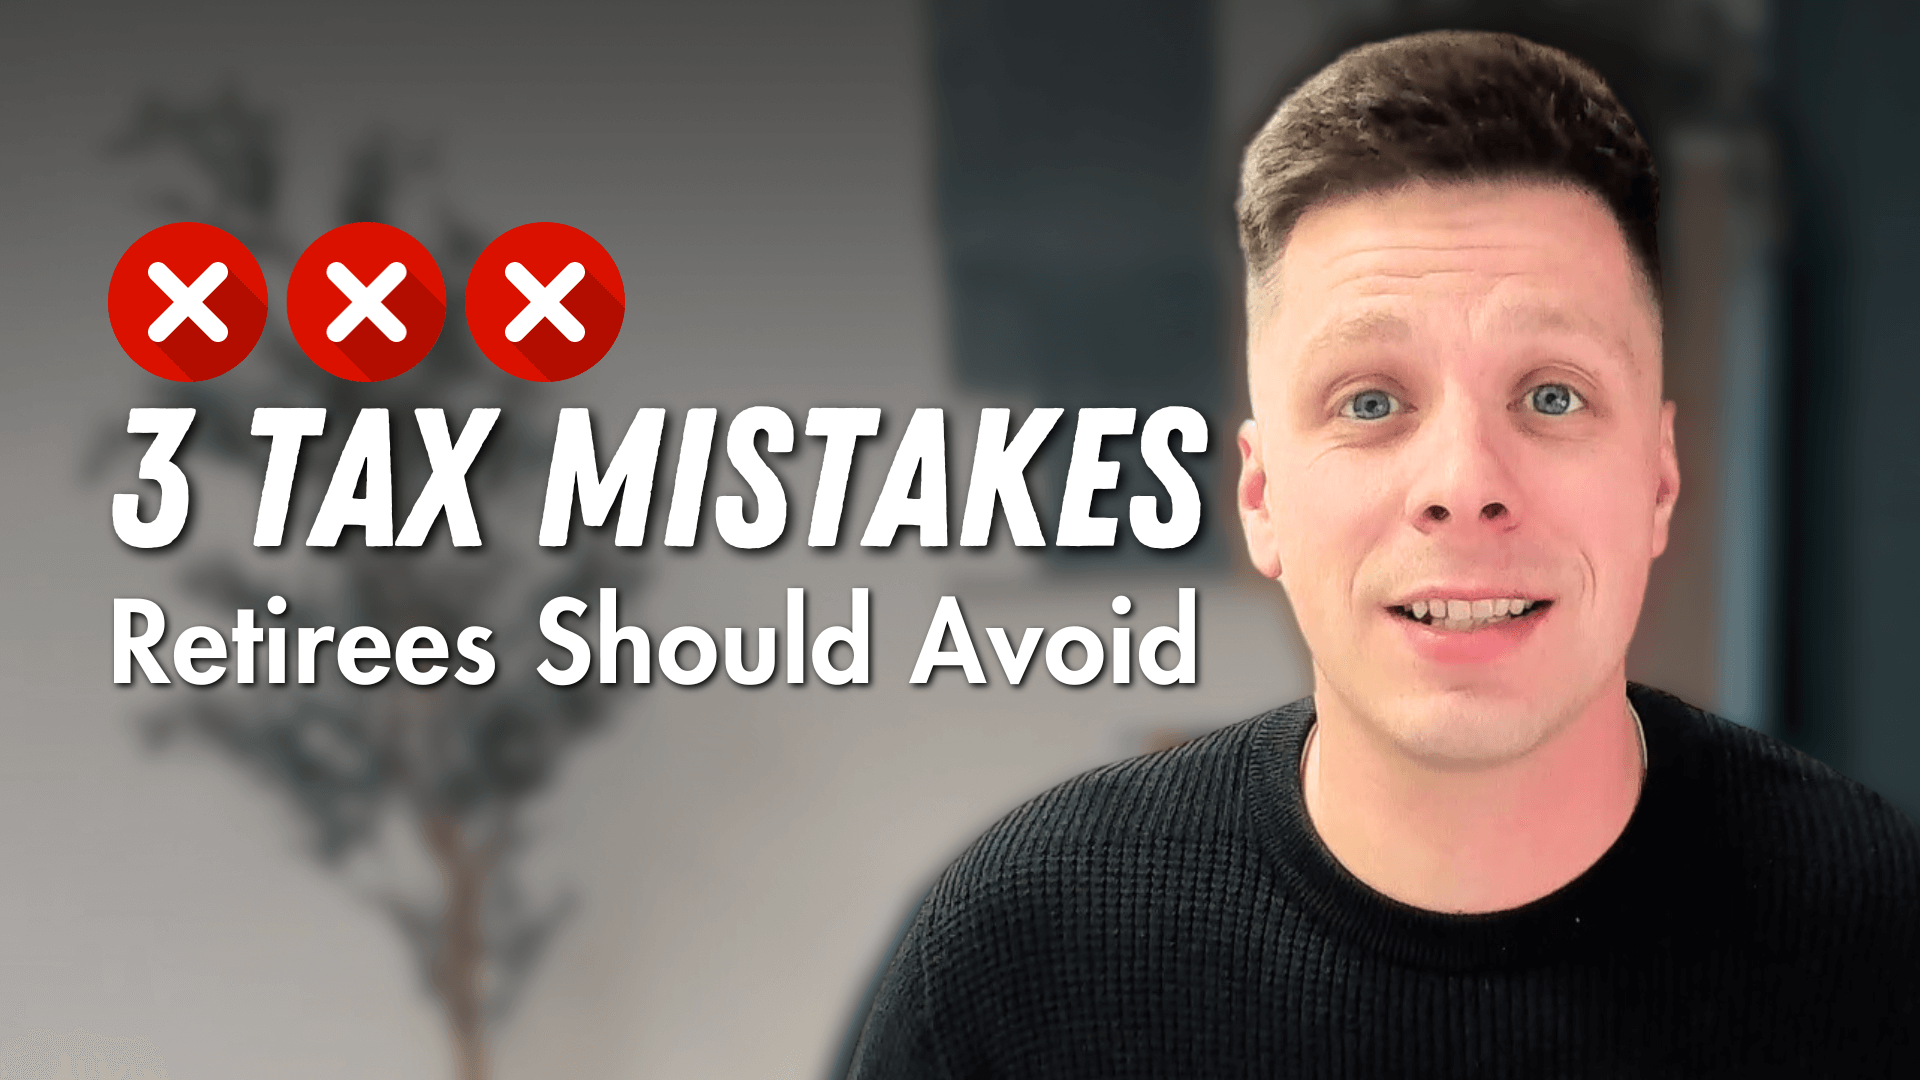 Tax Mistakes Every Retiree Should Avoid